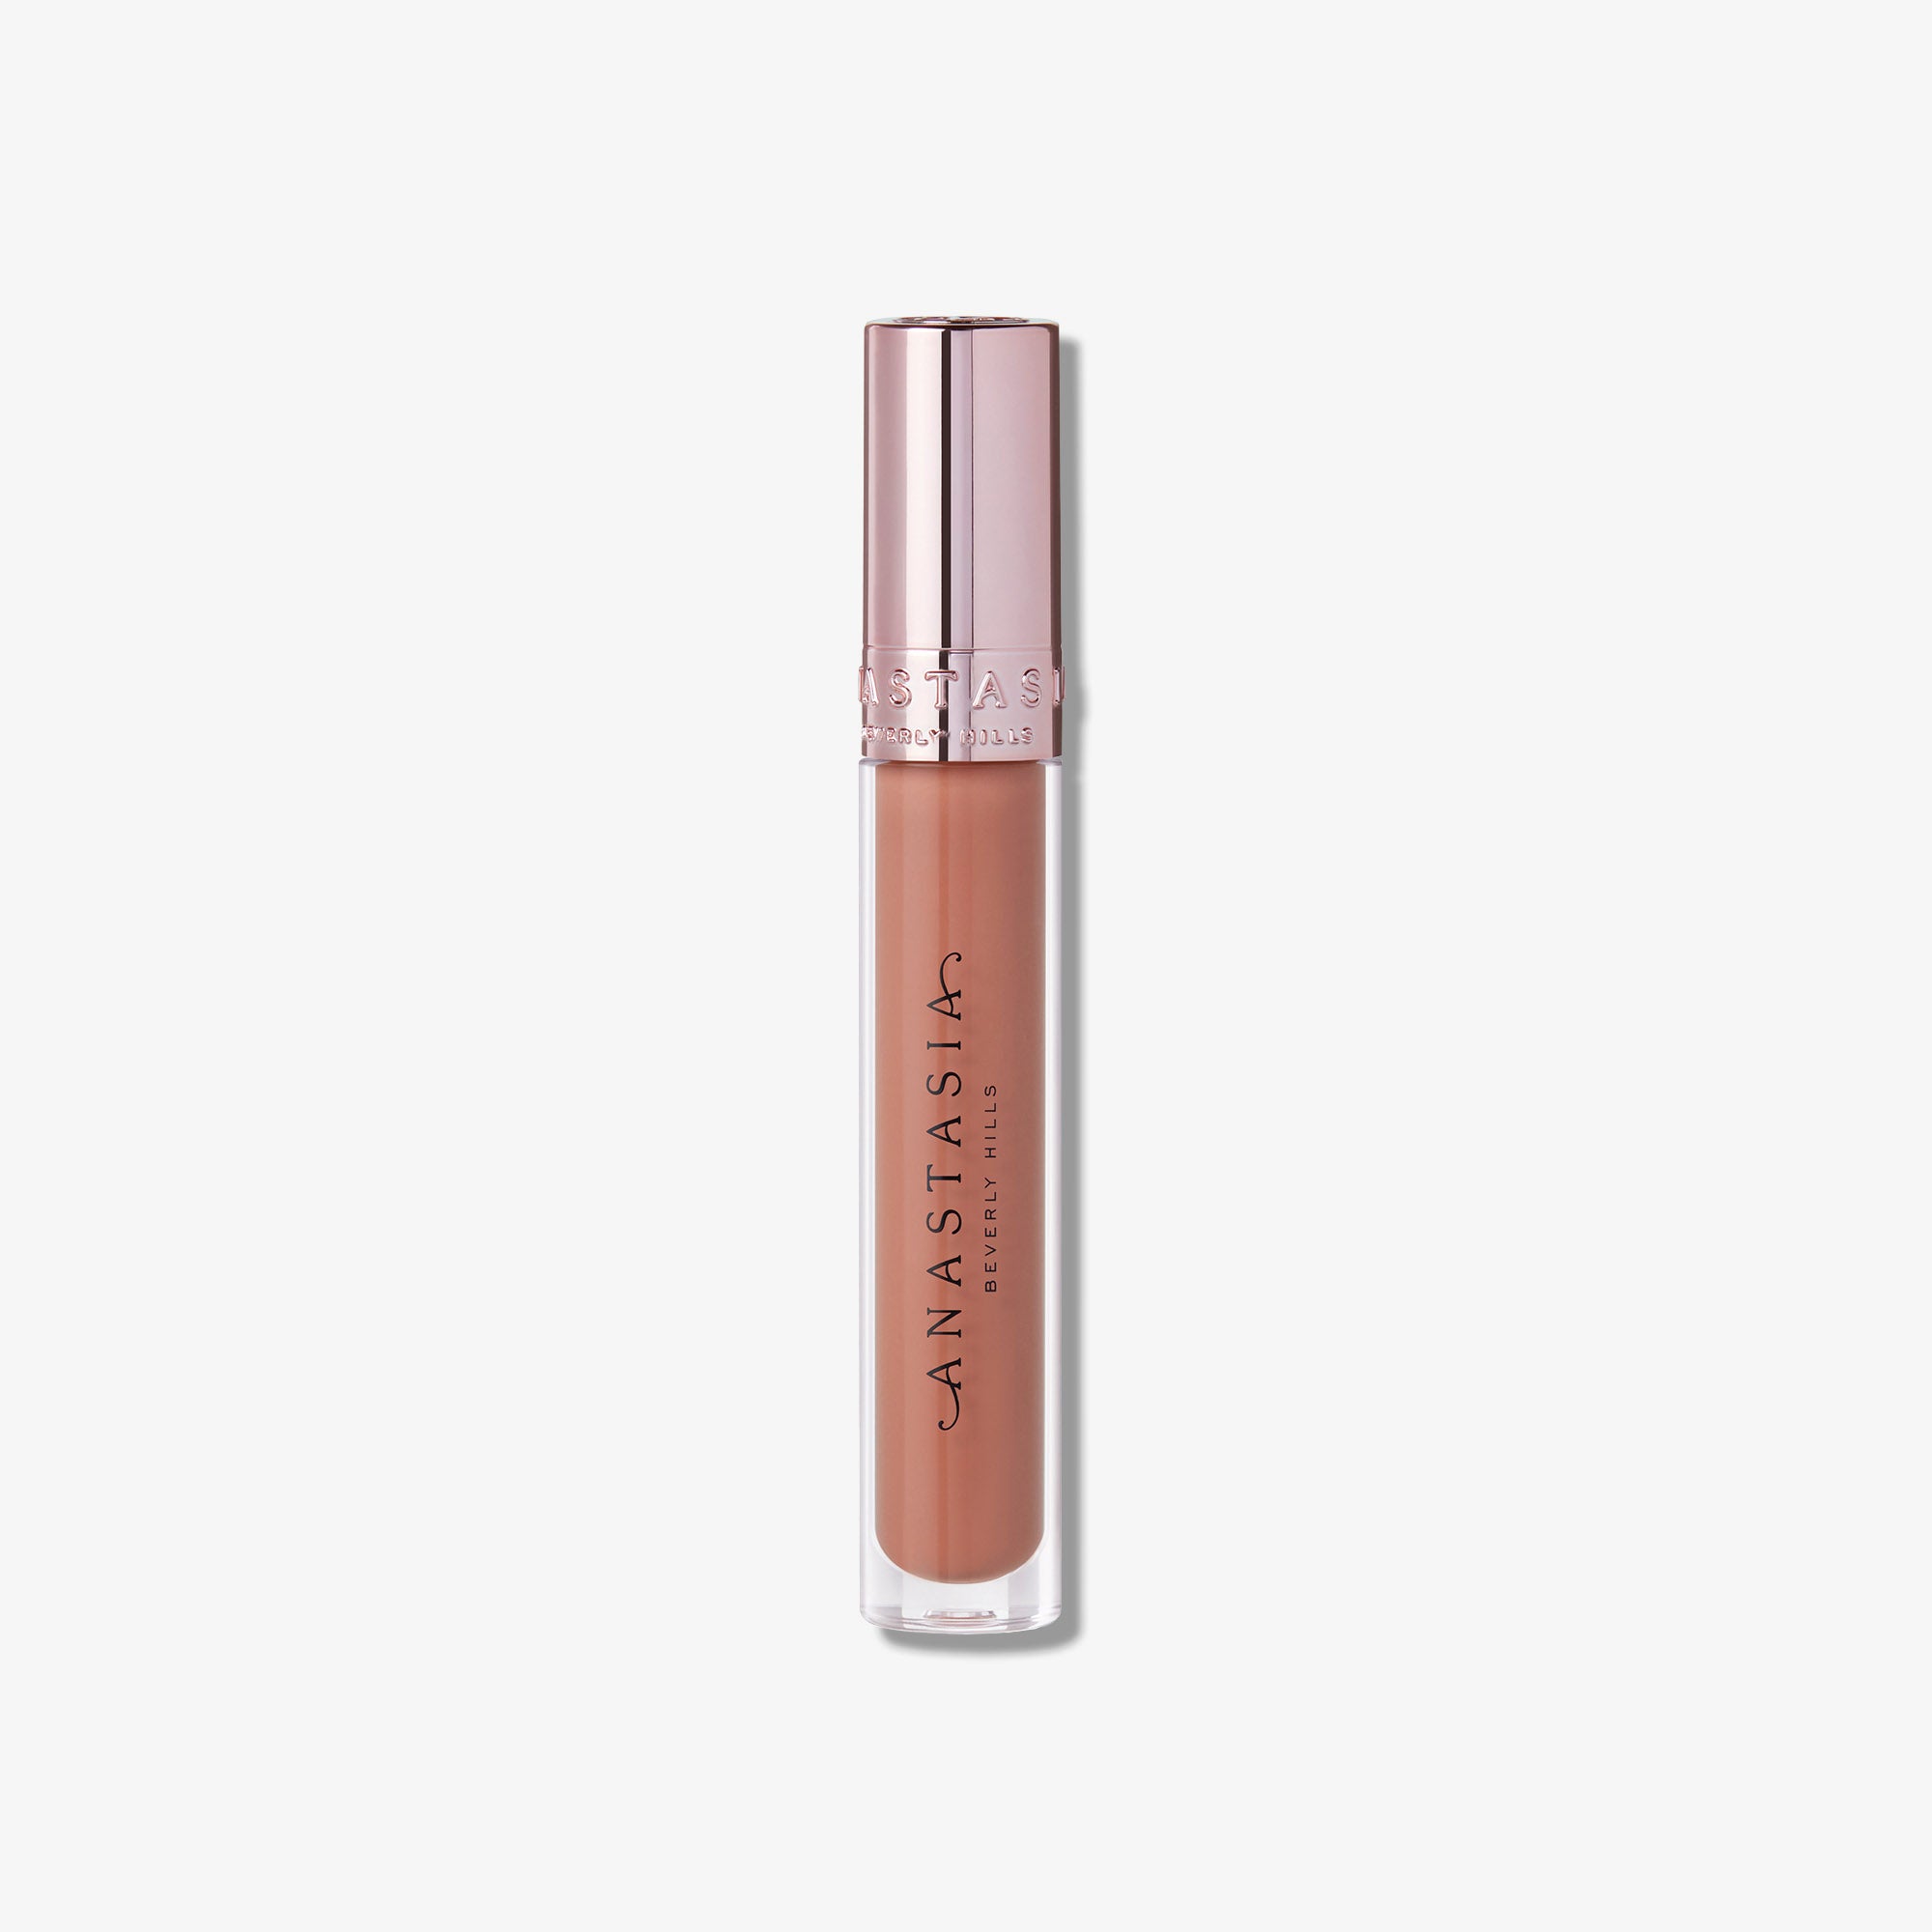 Anastasia Beverly Hills Deliniador Labial (cor: Deep Taupe) - Oxente Imports